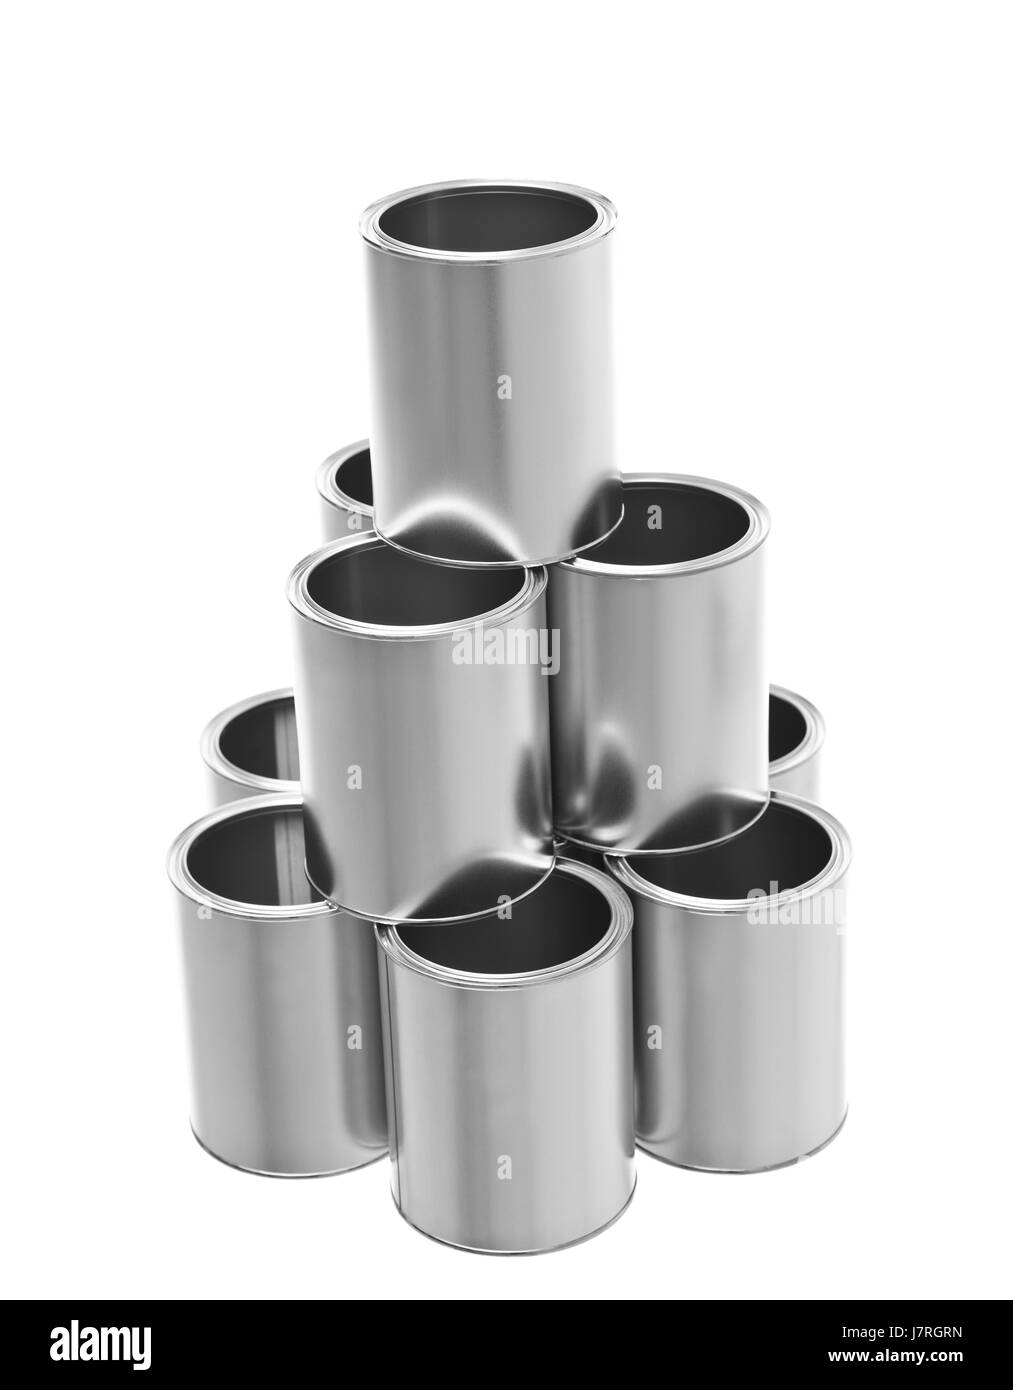 tower isolated pyramid metal balance stack container recycling clean can paint Stock Photo